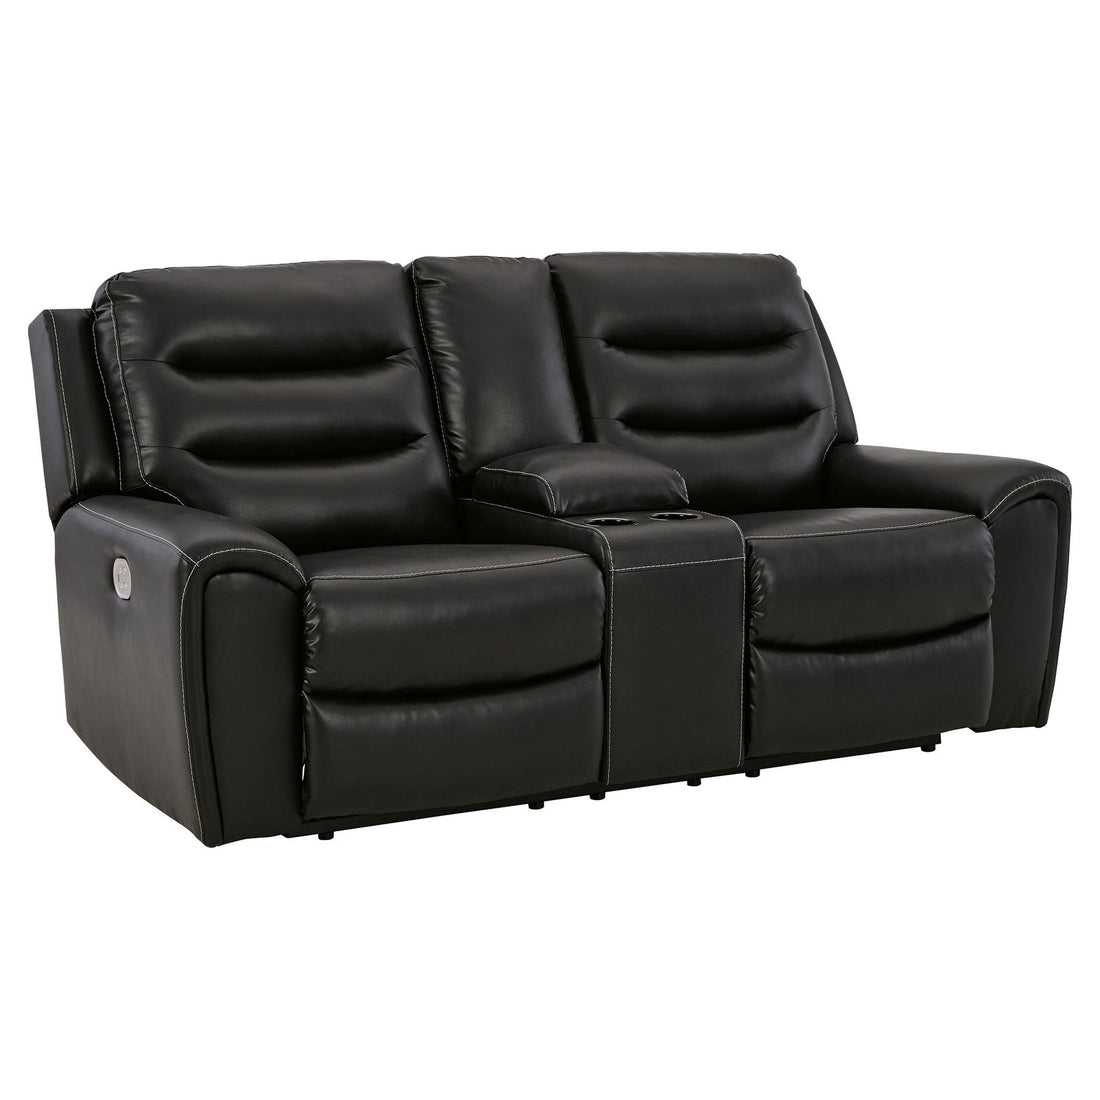 Warlin Power Reclining Loveseat with Console Ash-6110518